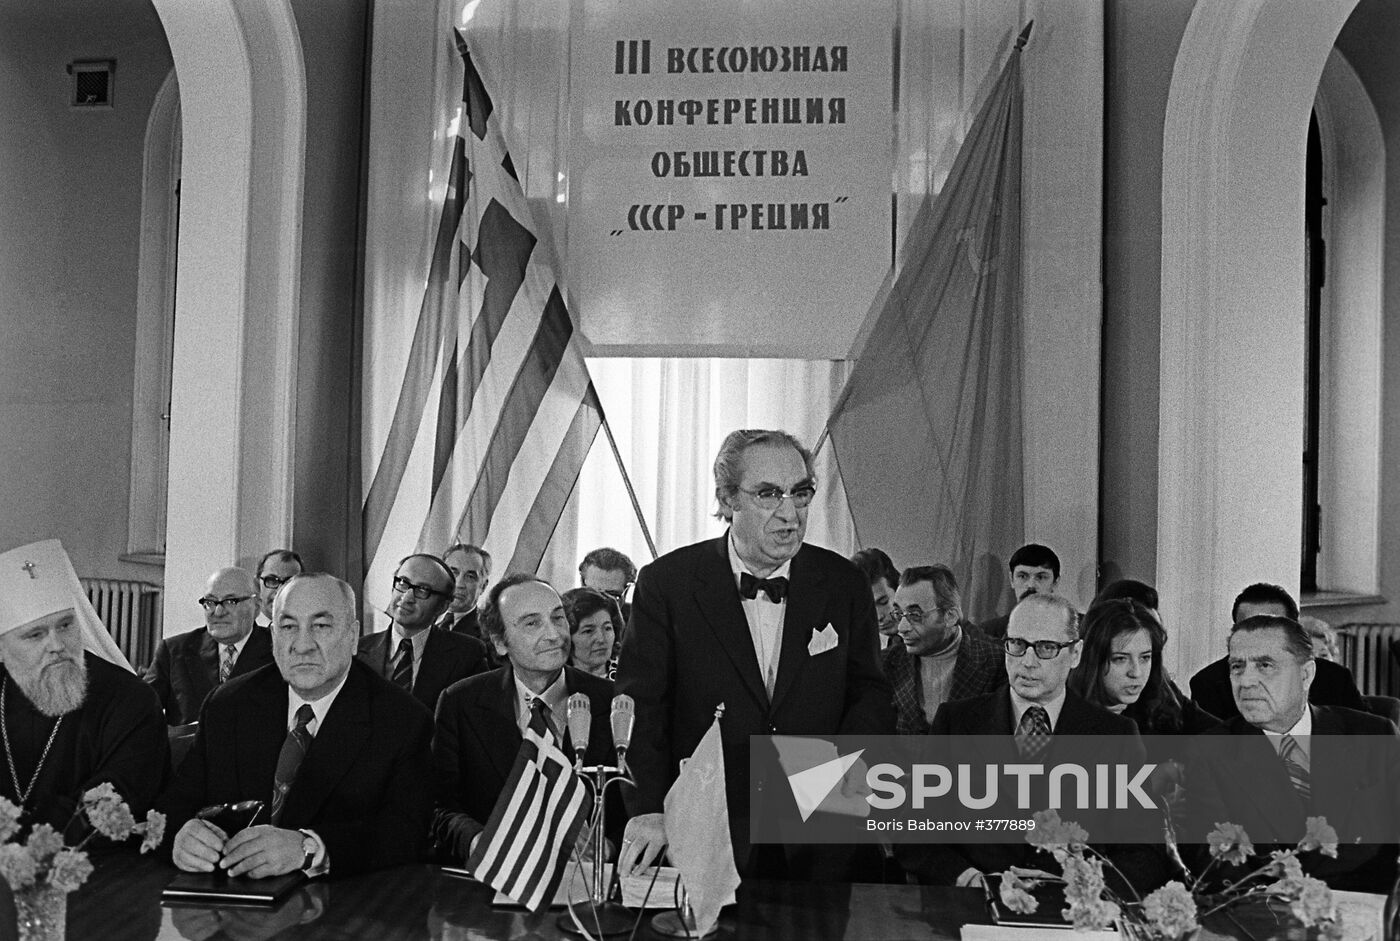 USSR-Greece Society's conference opened